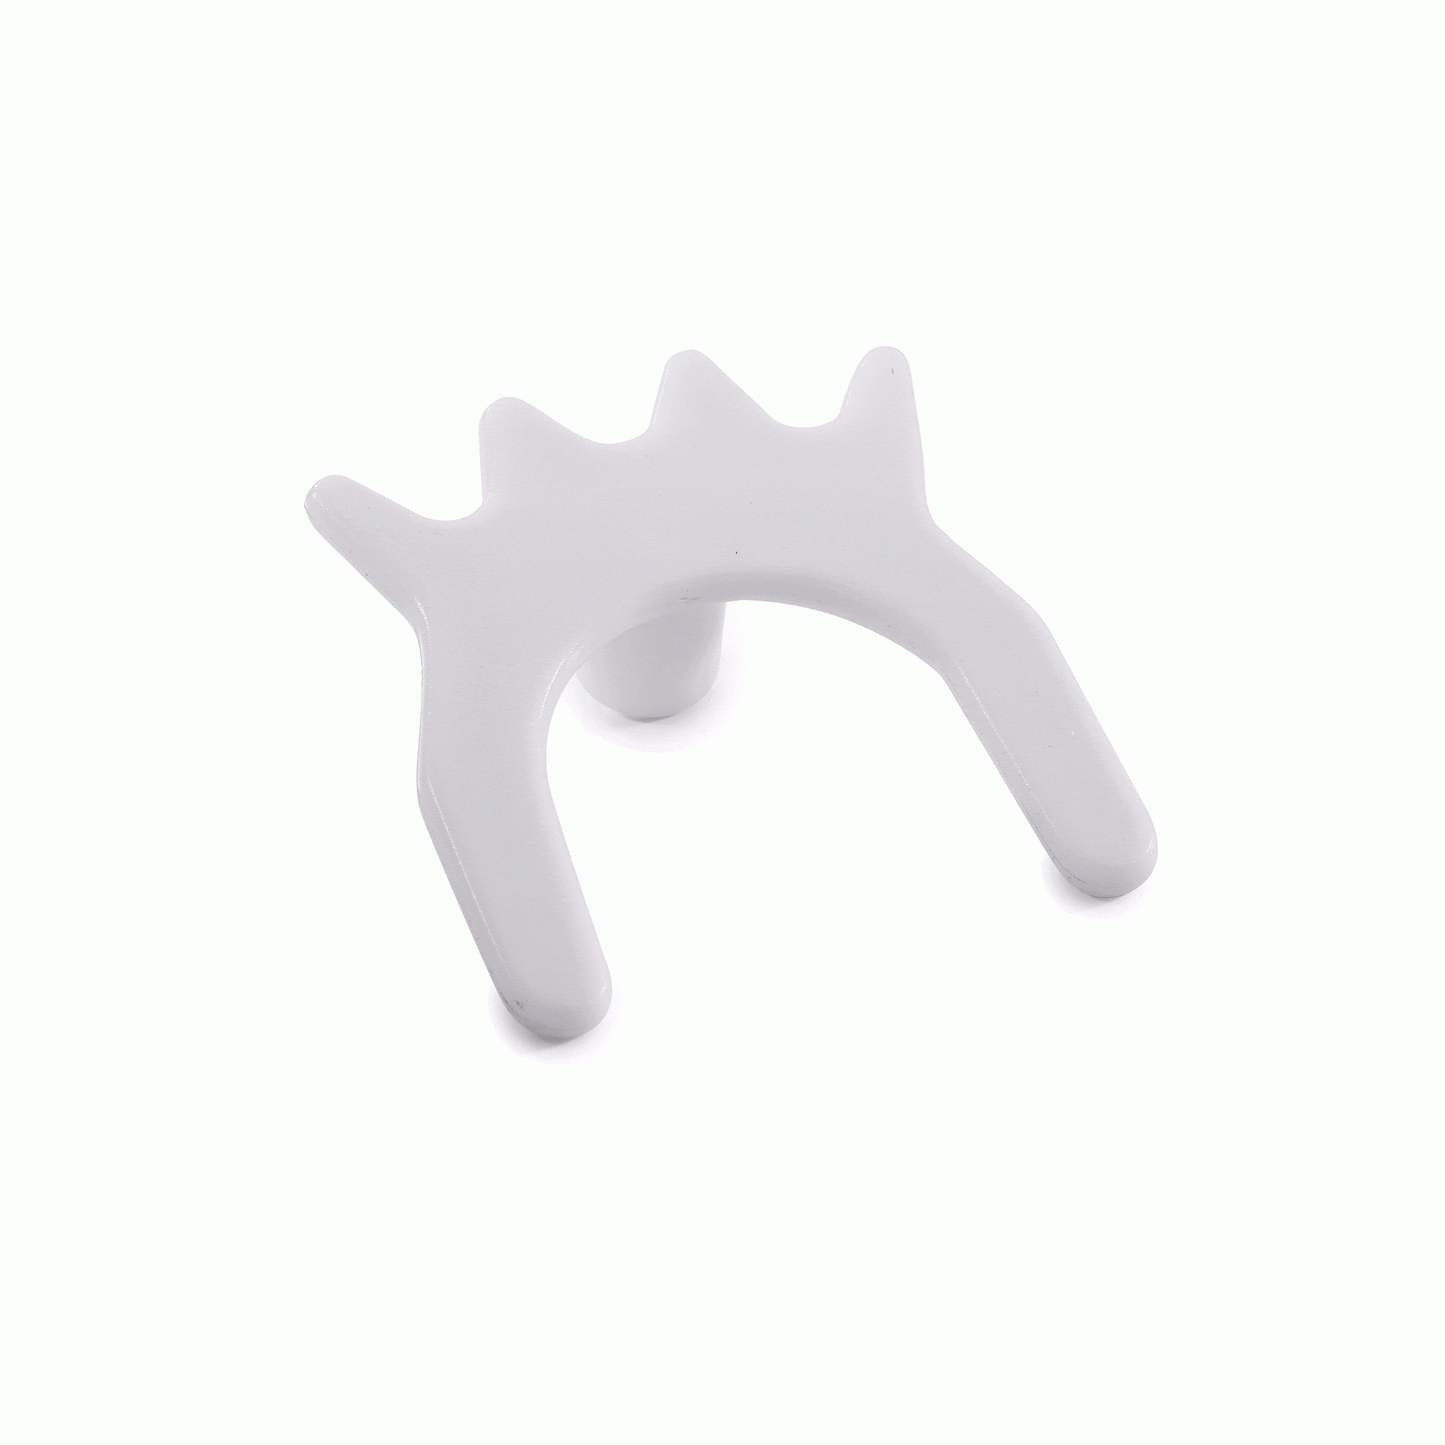 Nylon Cross Rest Low Spider Rest and High Spider Rest